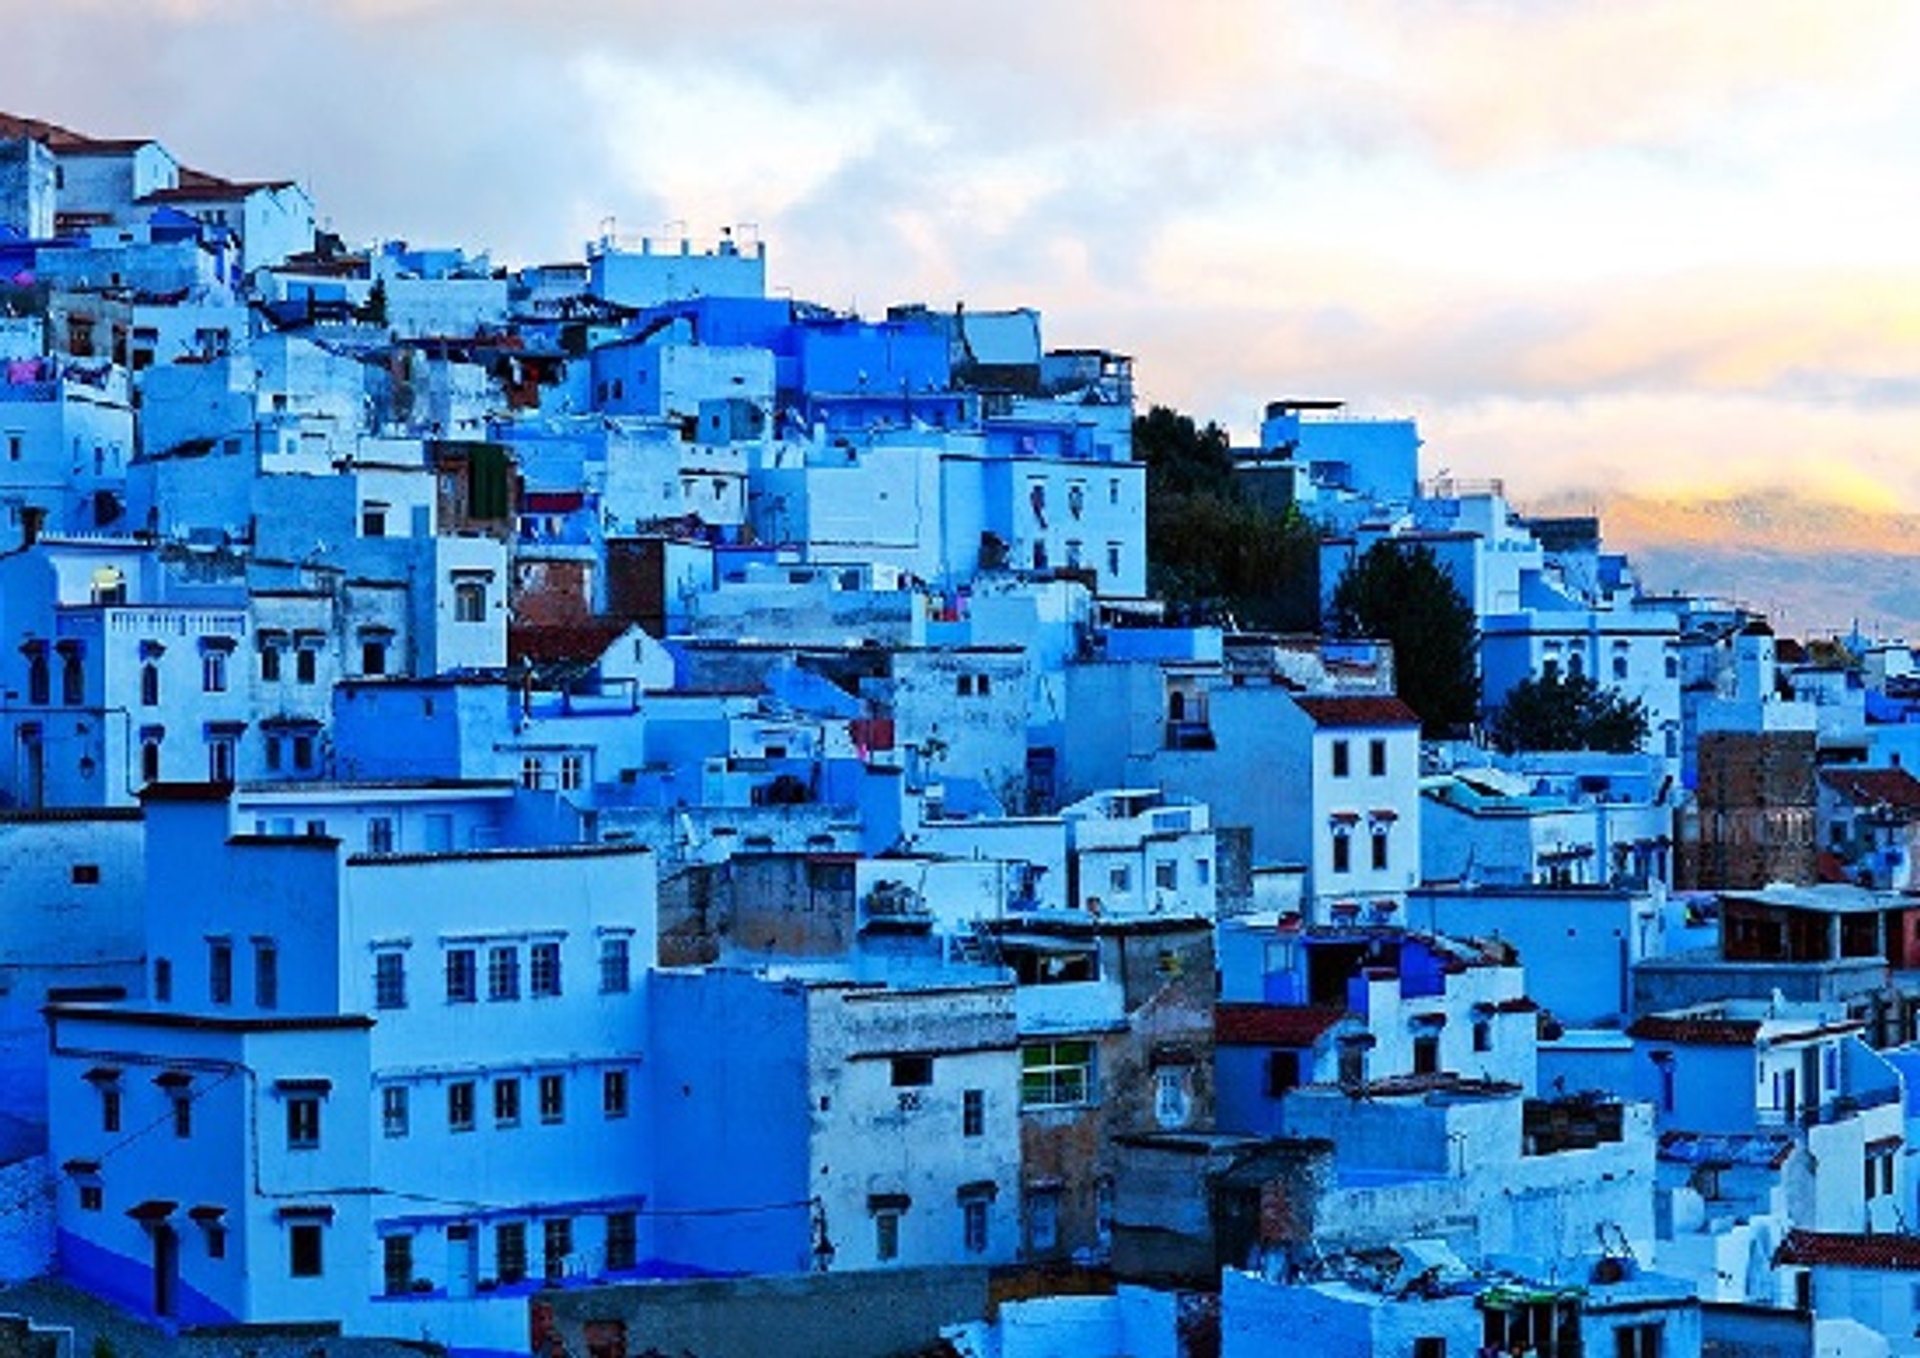 Step-into-another-world.-Known-as-the-Blue-Pearl-of-Morocco-the-beauty-of-the-city-evades-true-description.-World’s-most-blue-city-–-blue-Chefchaouen-of-Morocco